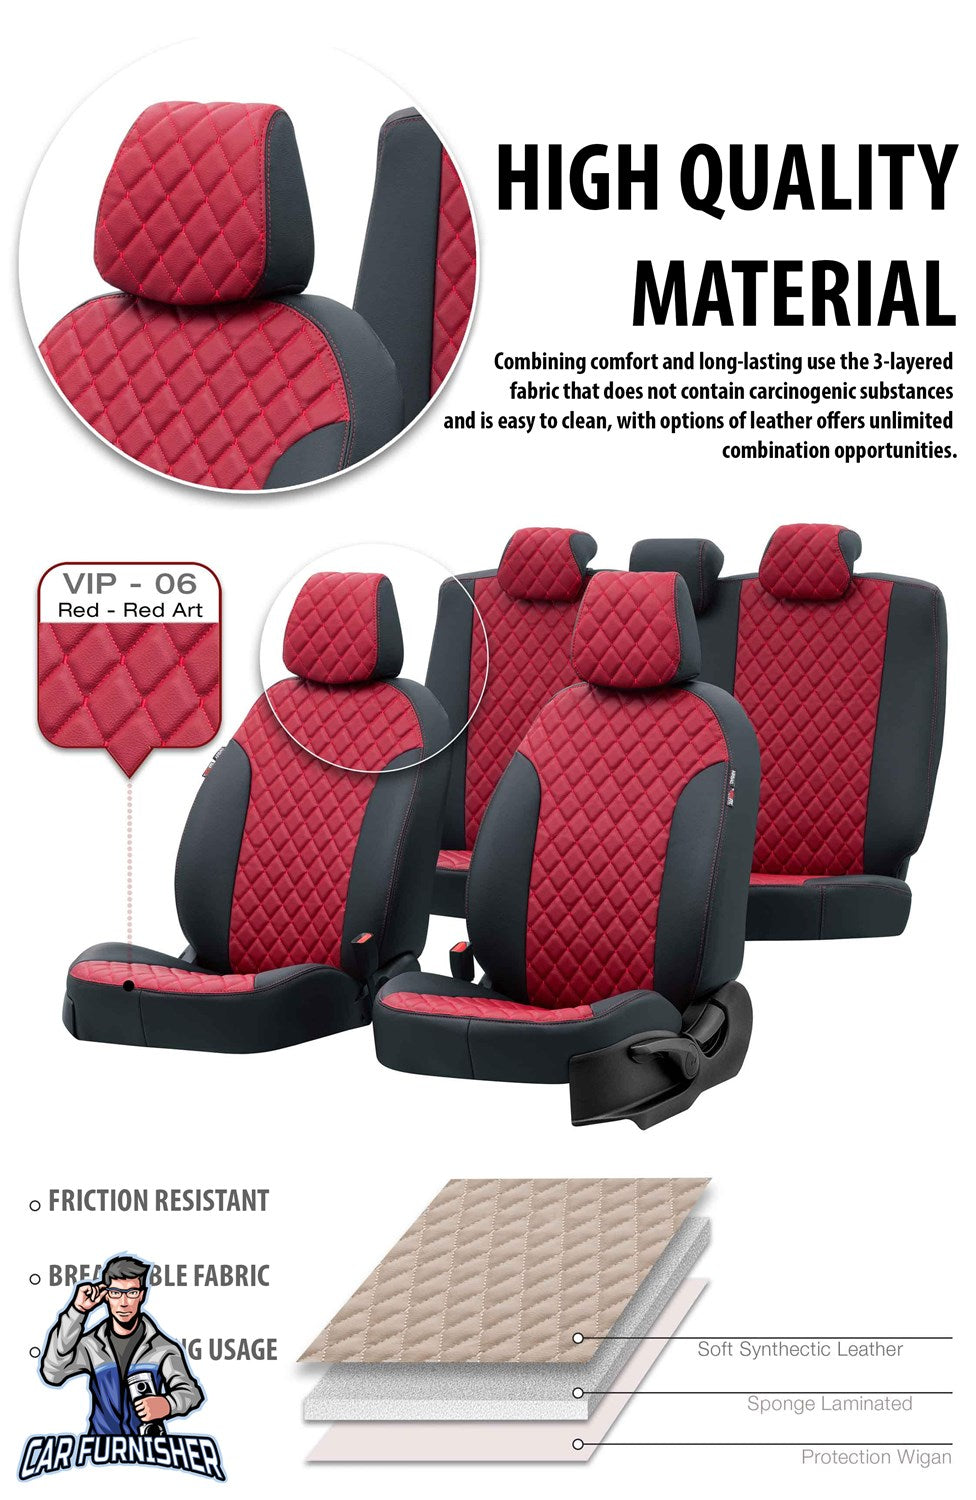 Peugeot 107 Seat Covers Madrid Leather Design Dark Red Leather